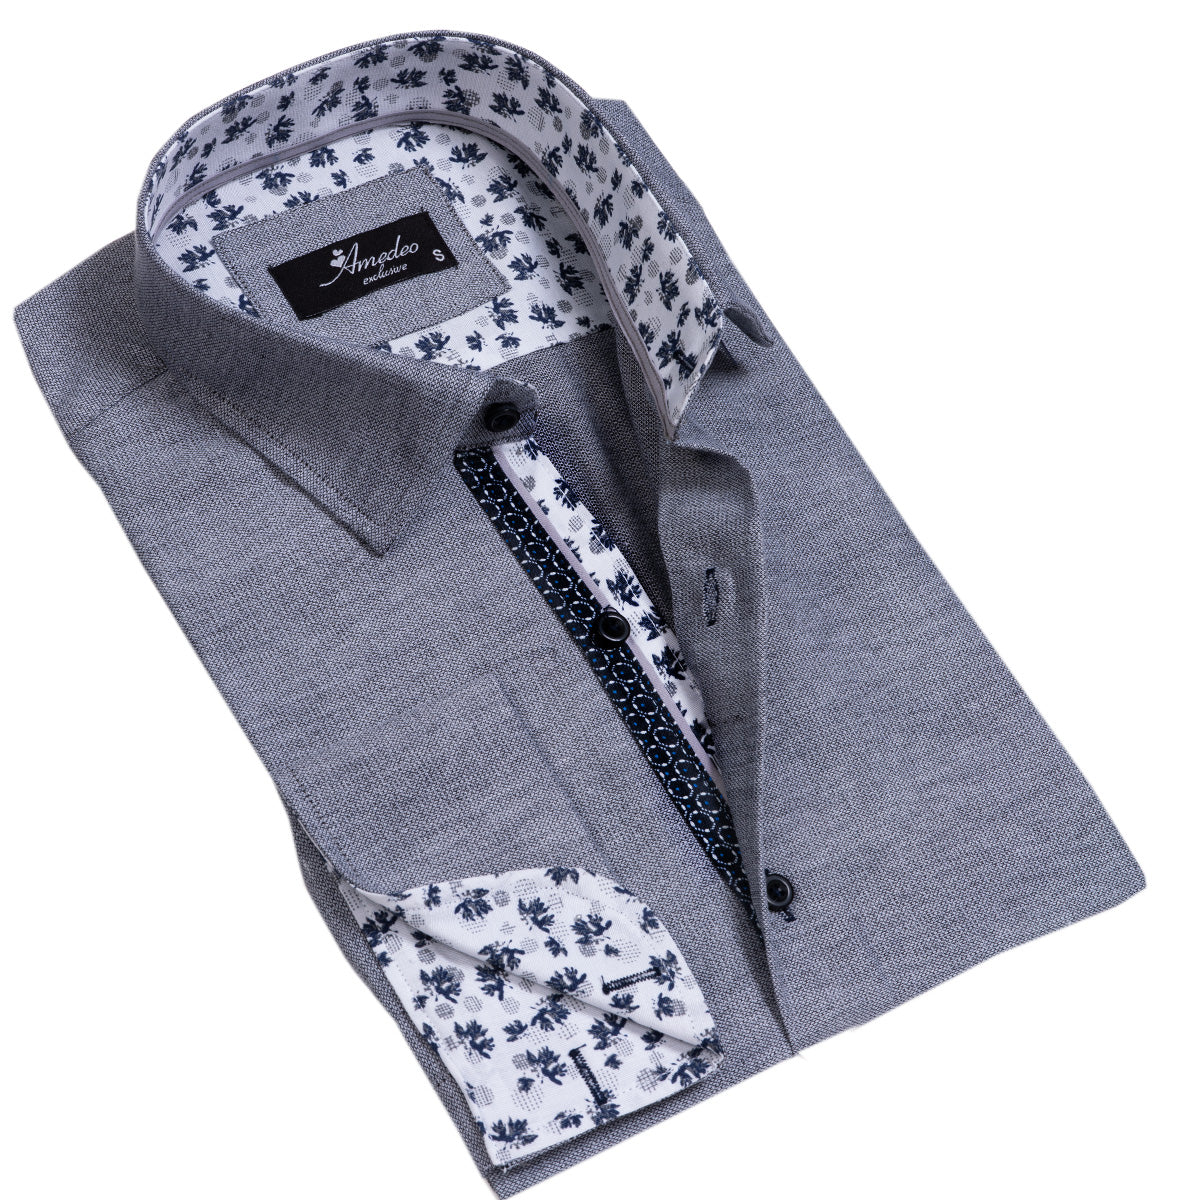 Mens Slim Fit French Cuff Shirts with Cufflink Holes - Casual and Formal